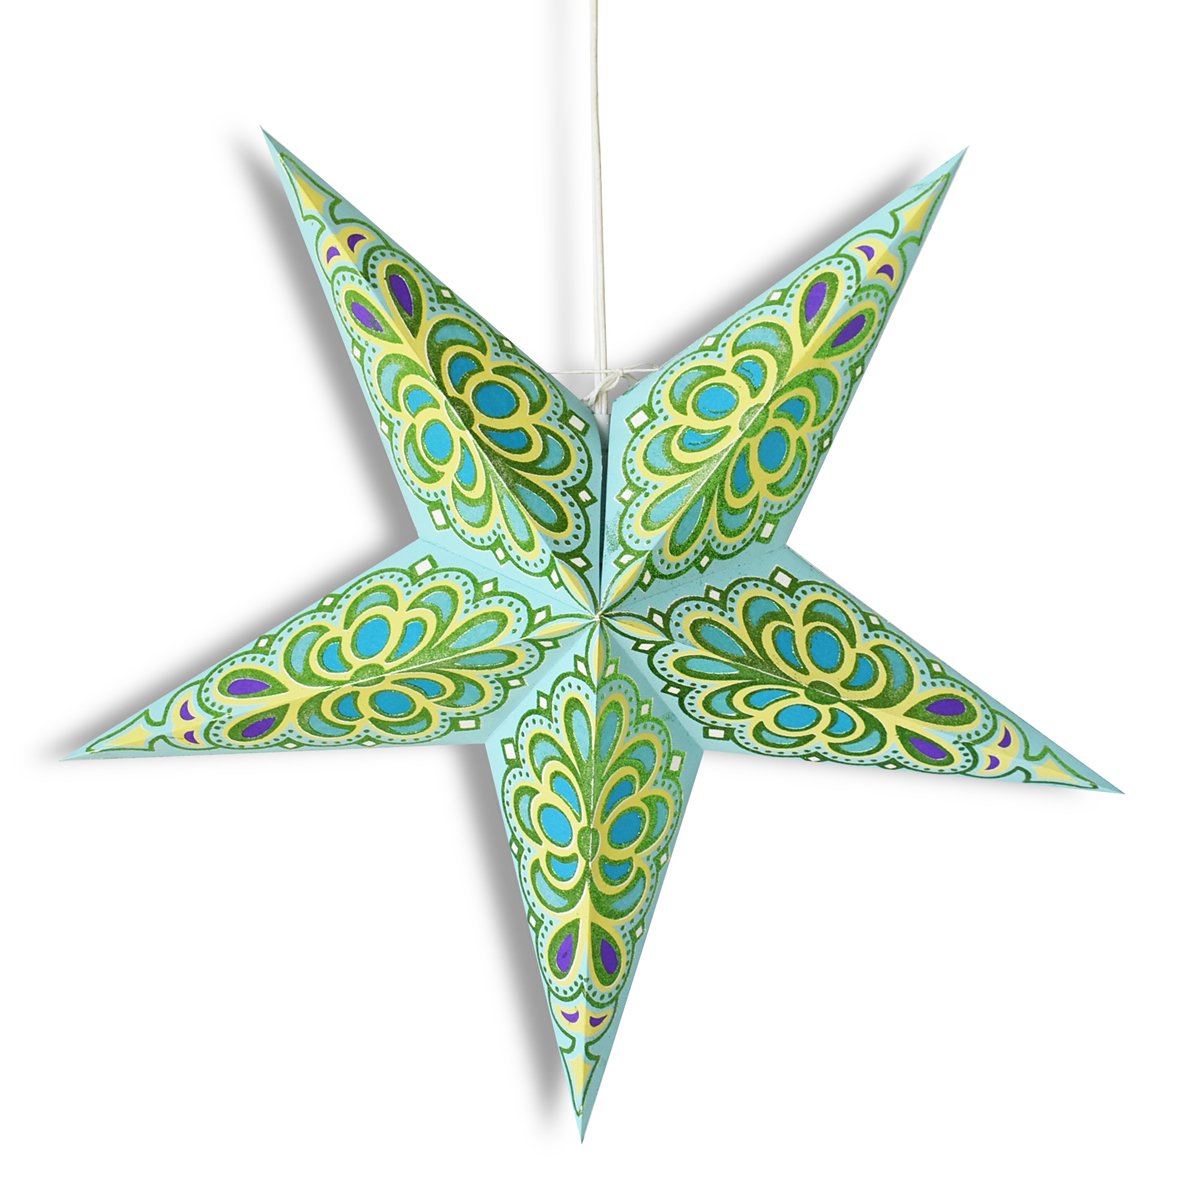 3-PACK + Cord | Green / Turquoise Merry Glitter 24&quot; Illuminated Paper Star Lanterns and Lamp Cord Hanging Decorations - LunaBazaar.com - Discover. Decorate. Celebrate.